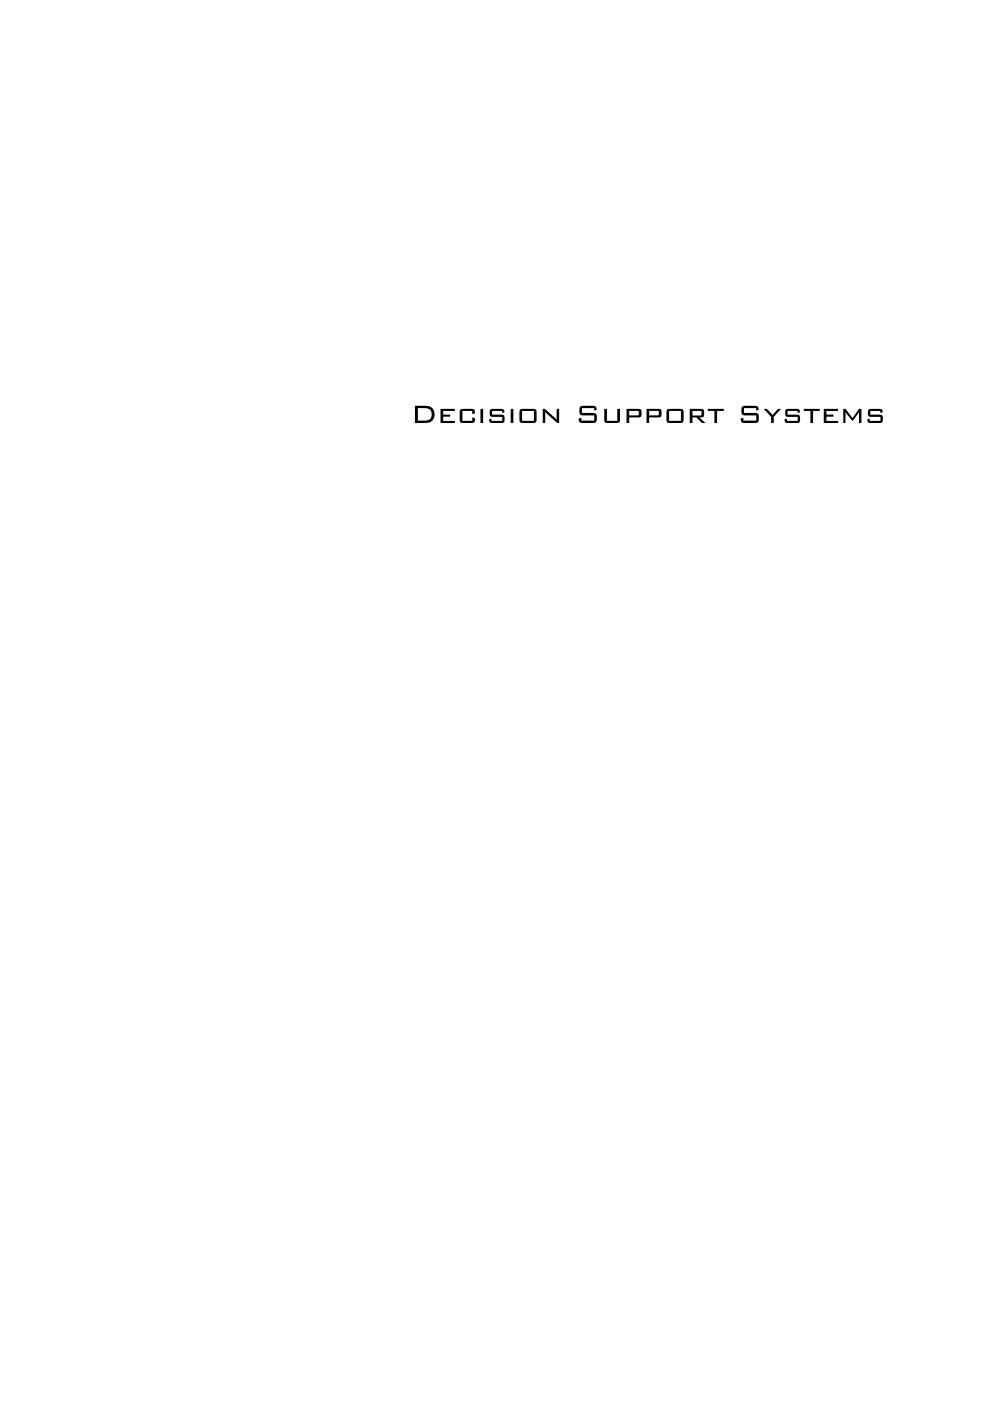 Microsoft Word - Preface&Contents_Decision_Support_Systems.doc